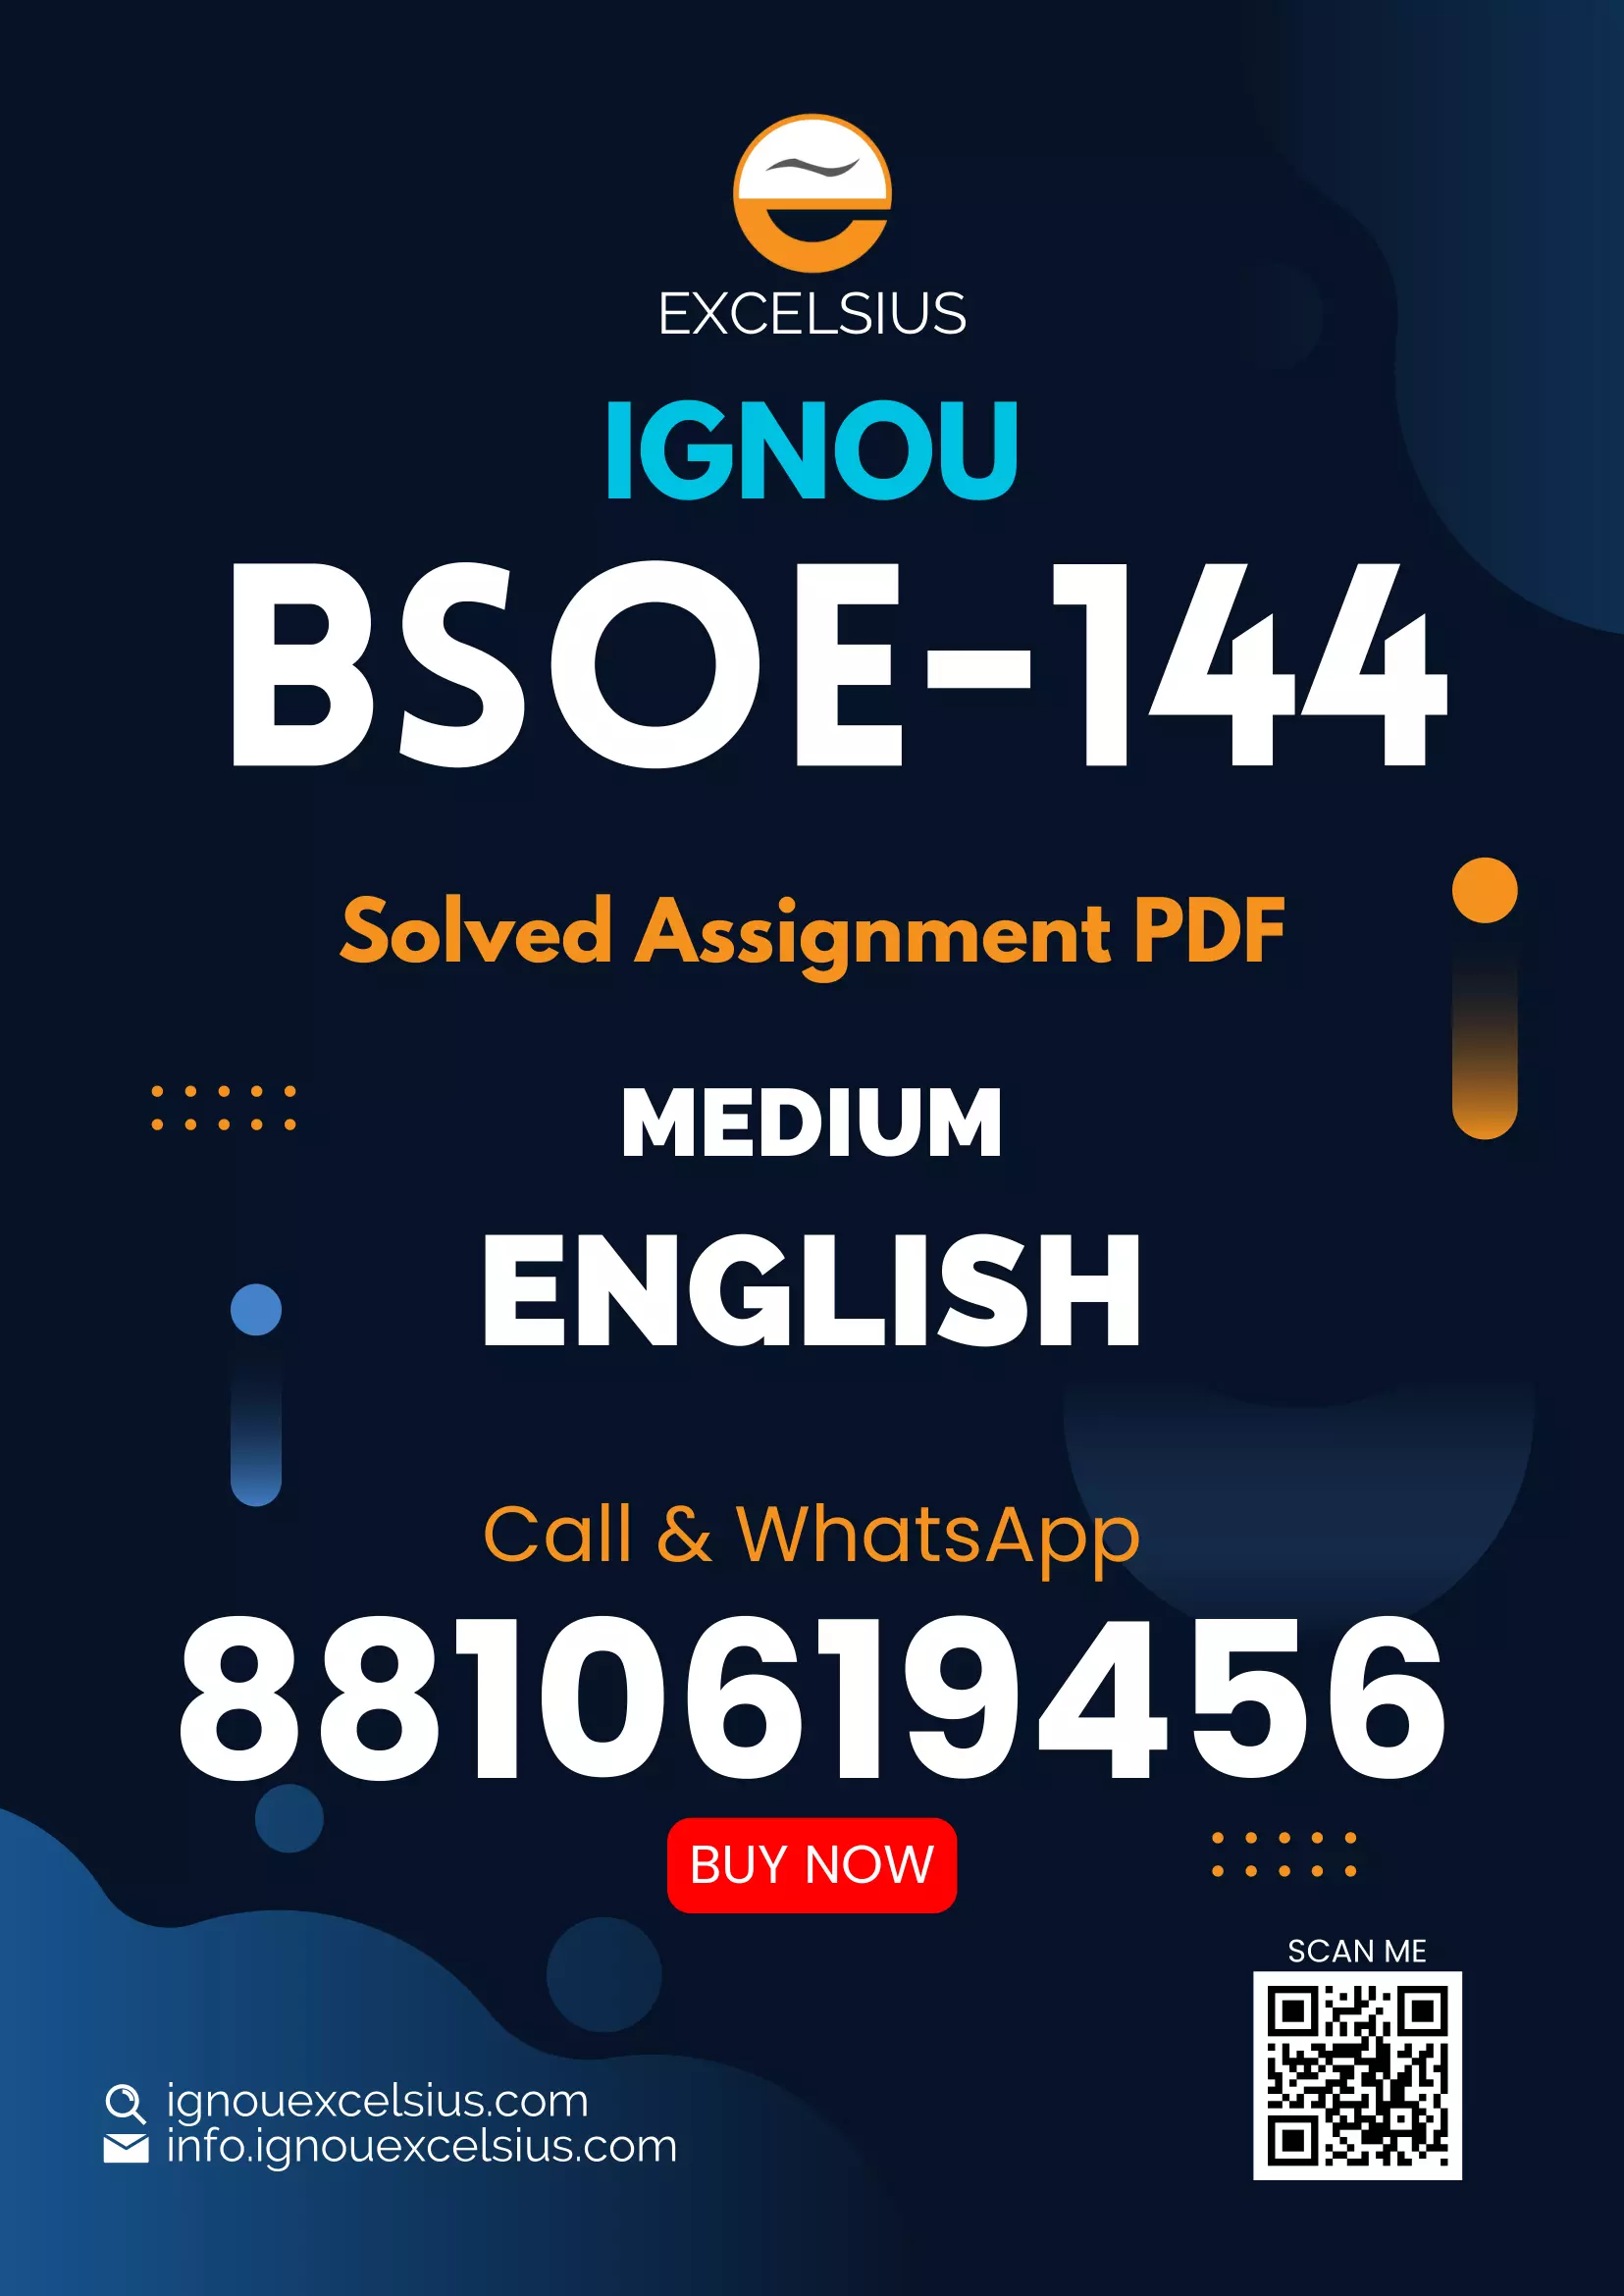 IGNOU BSOE-144 - Reading Ethnographies, Latest Solved Assignment-July 2022 – January 2023